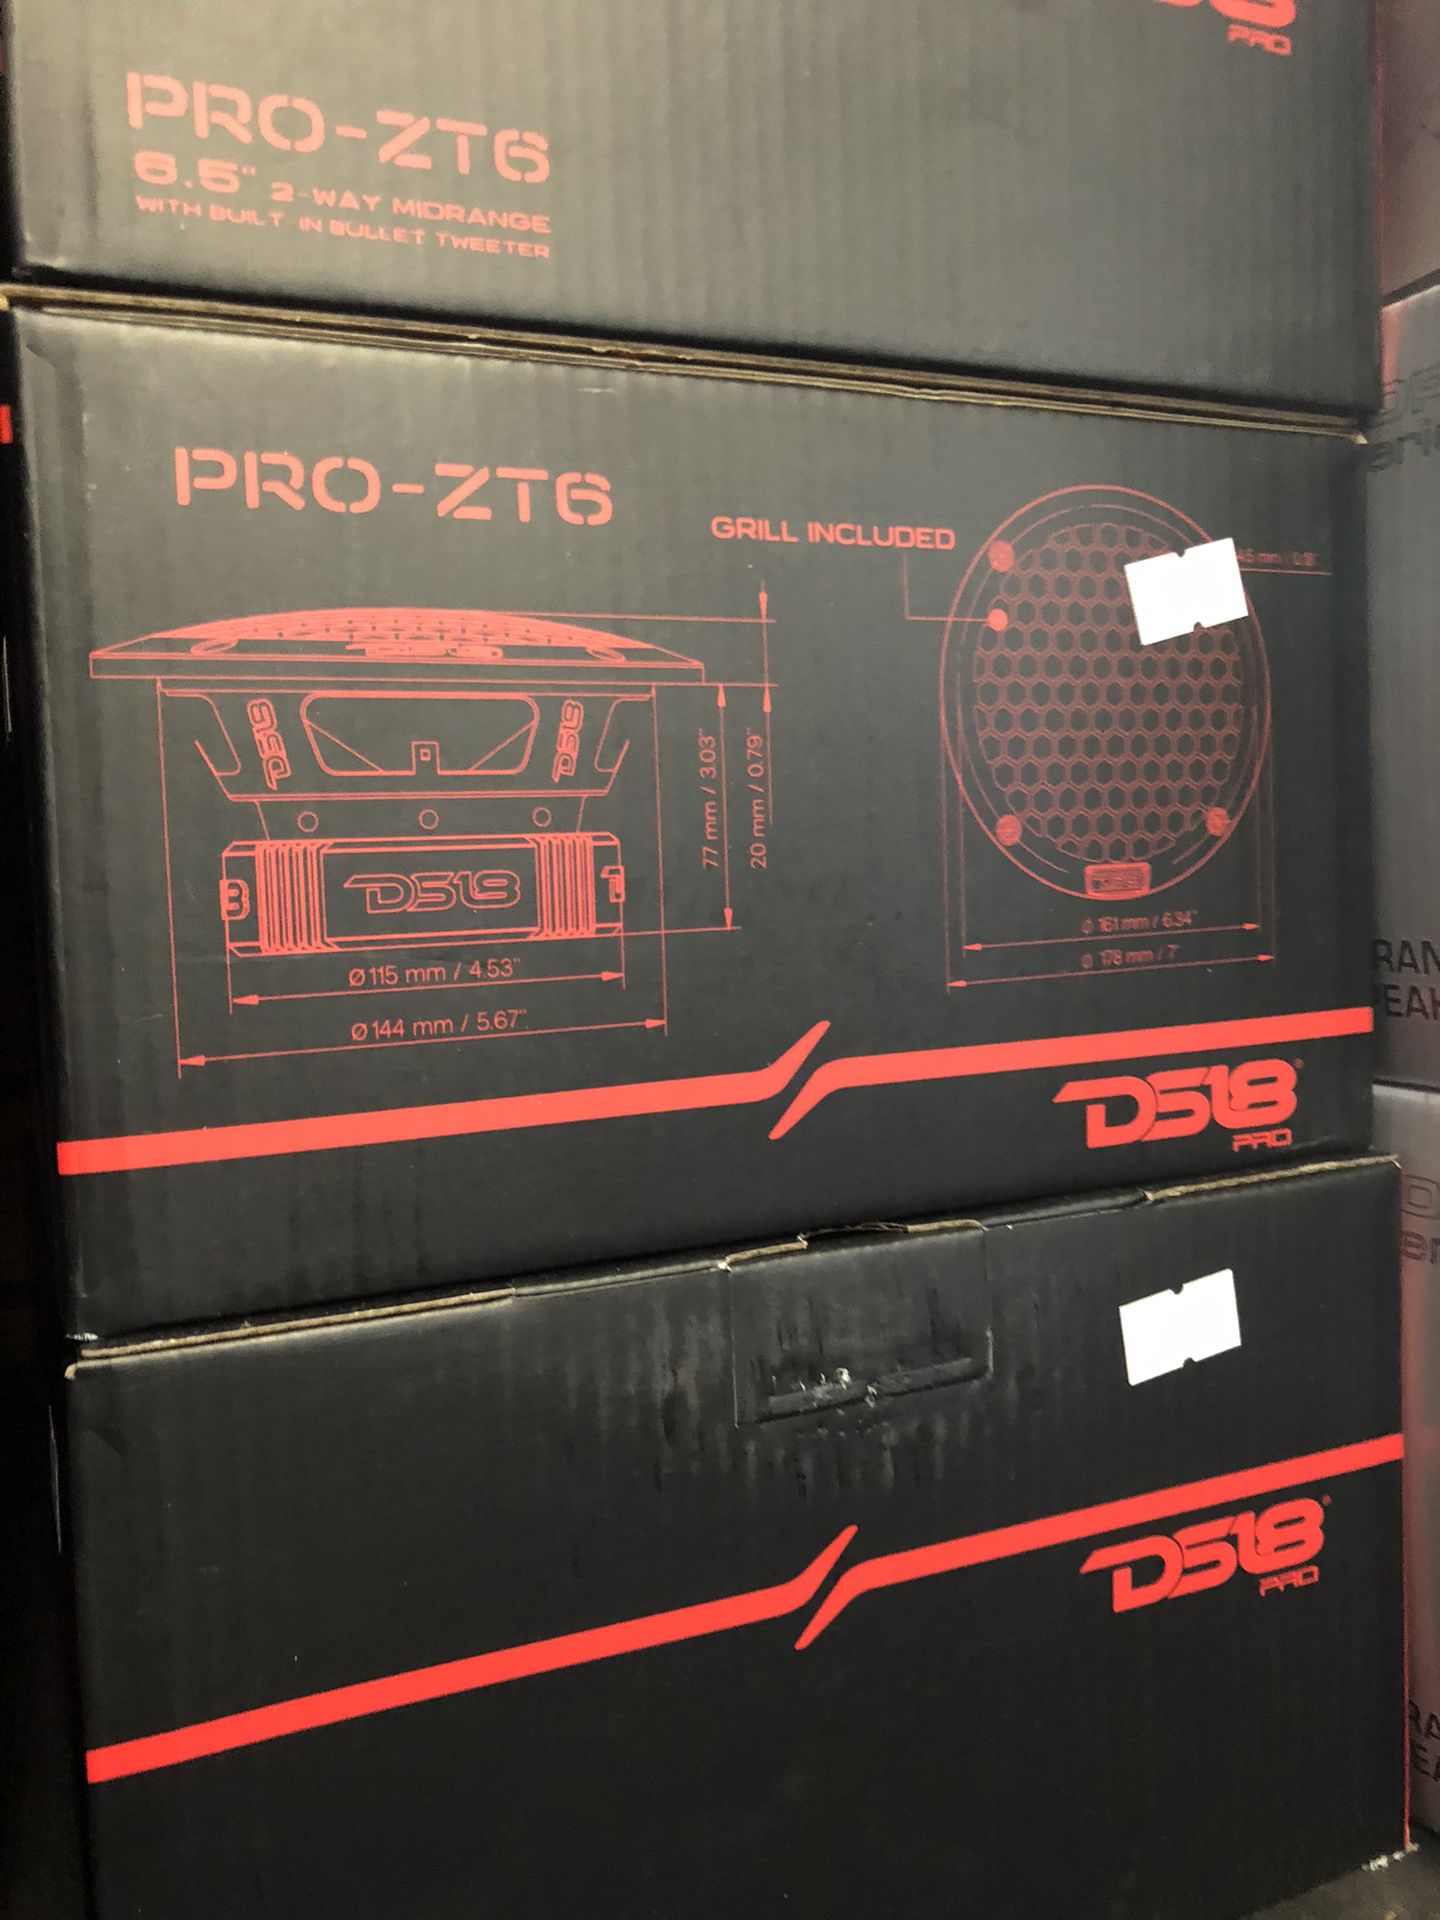 Ds18 Pro-zt6 On Sale Today For 79.99